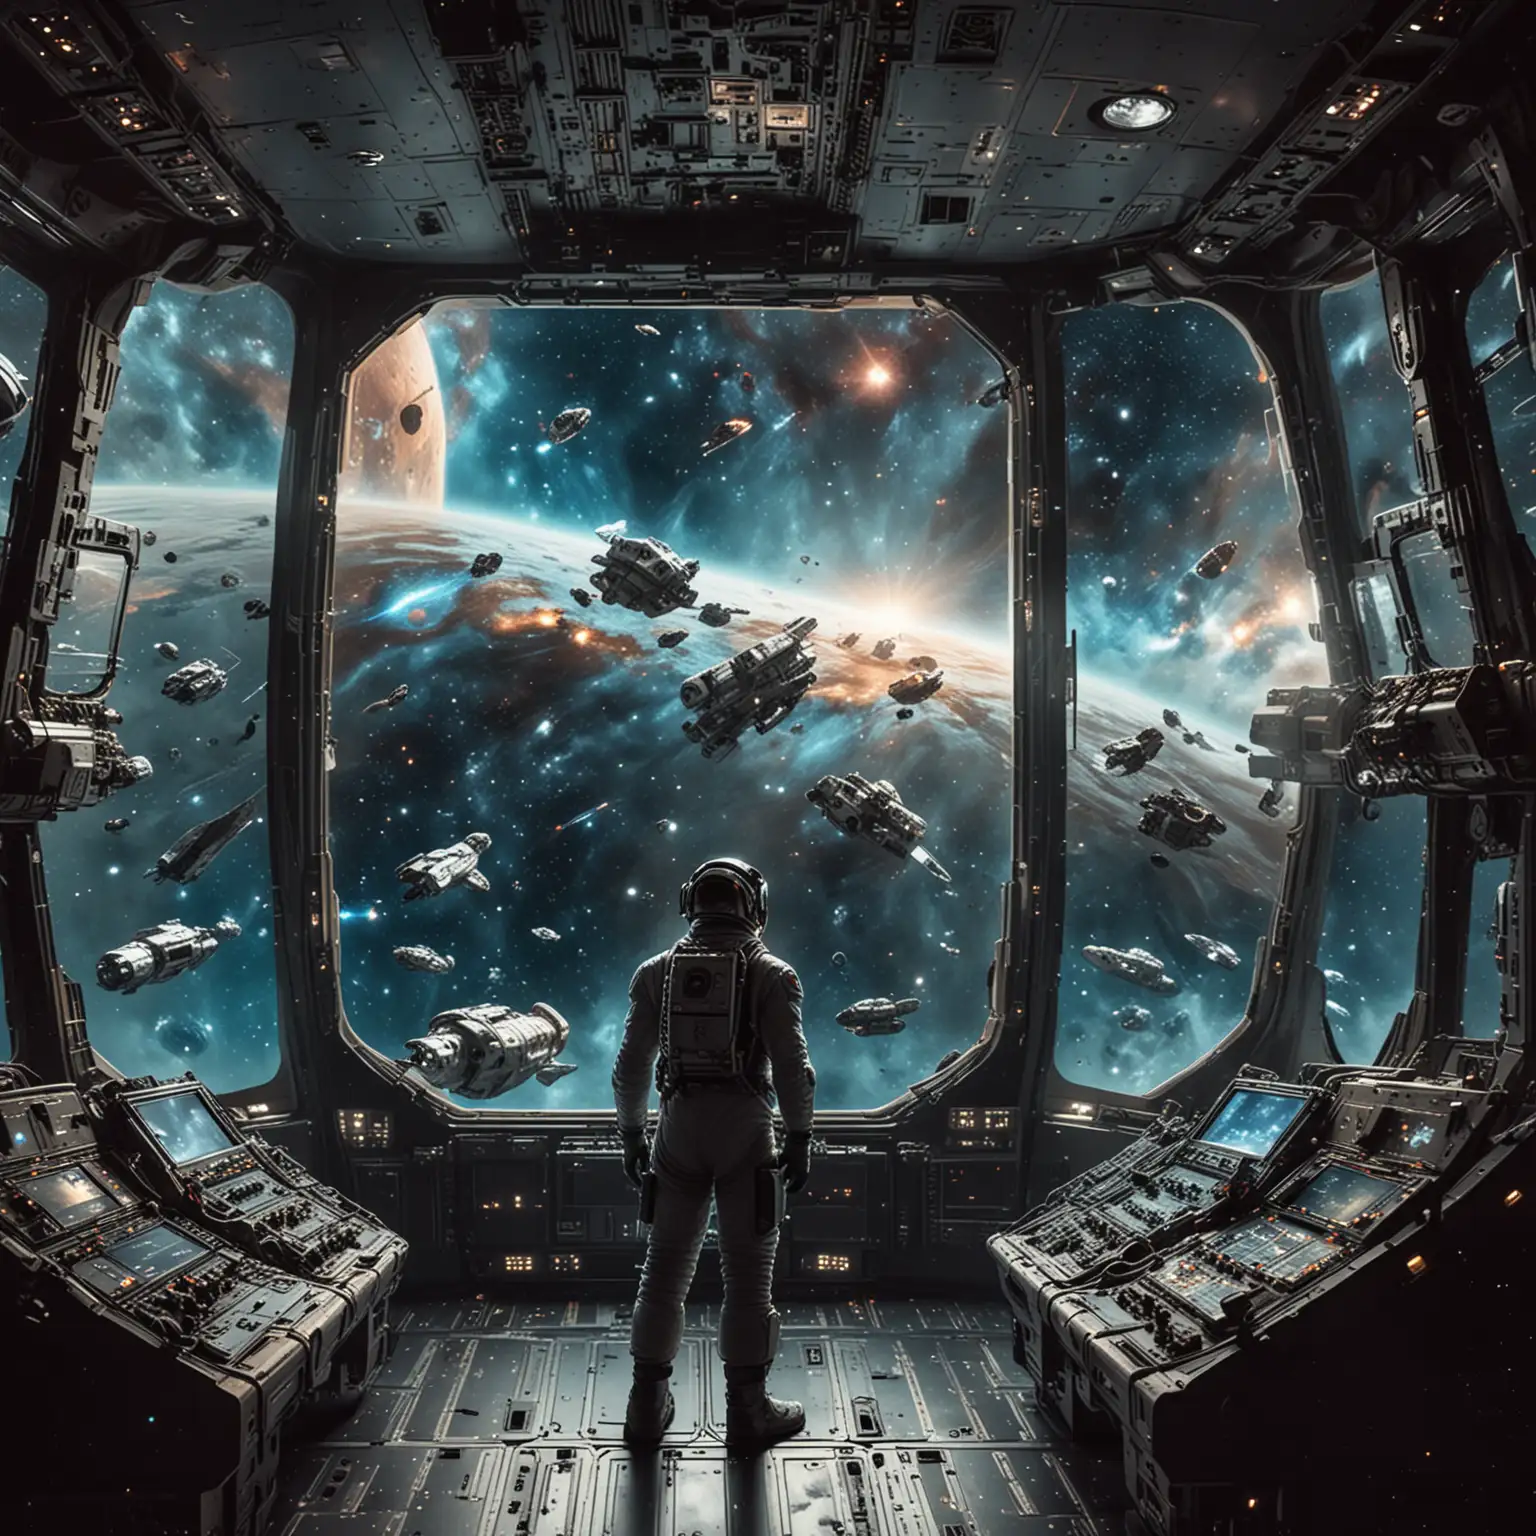 Astronaut stands large command centre of a spaceship looks out of a large window to a large fleet of ships in a nebula, with no planet nearby